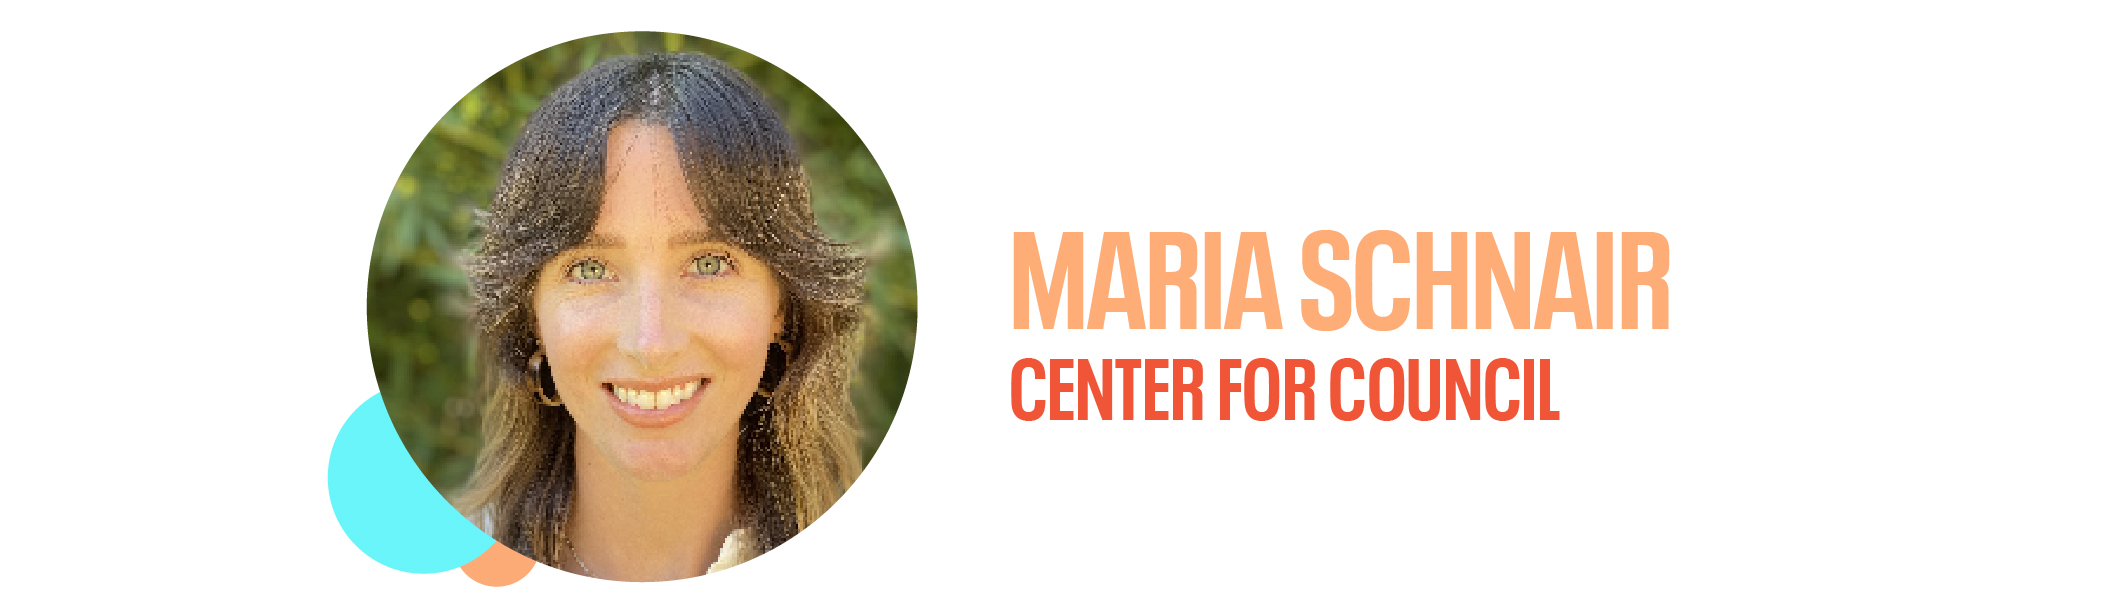 Maria Schnair, director of advancement at Center for Council